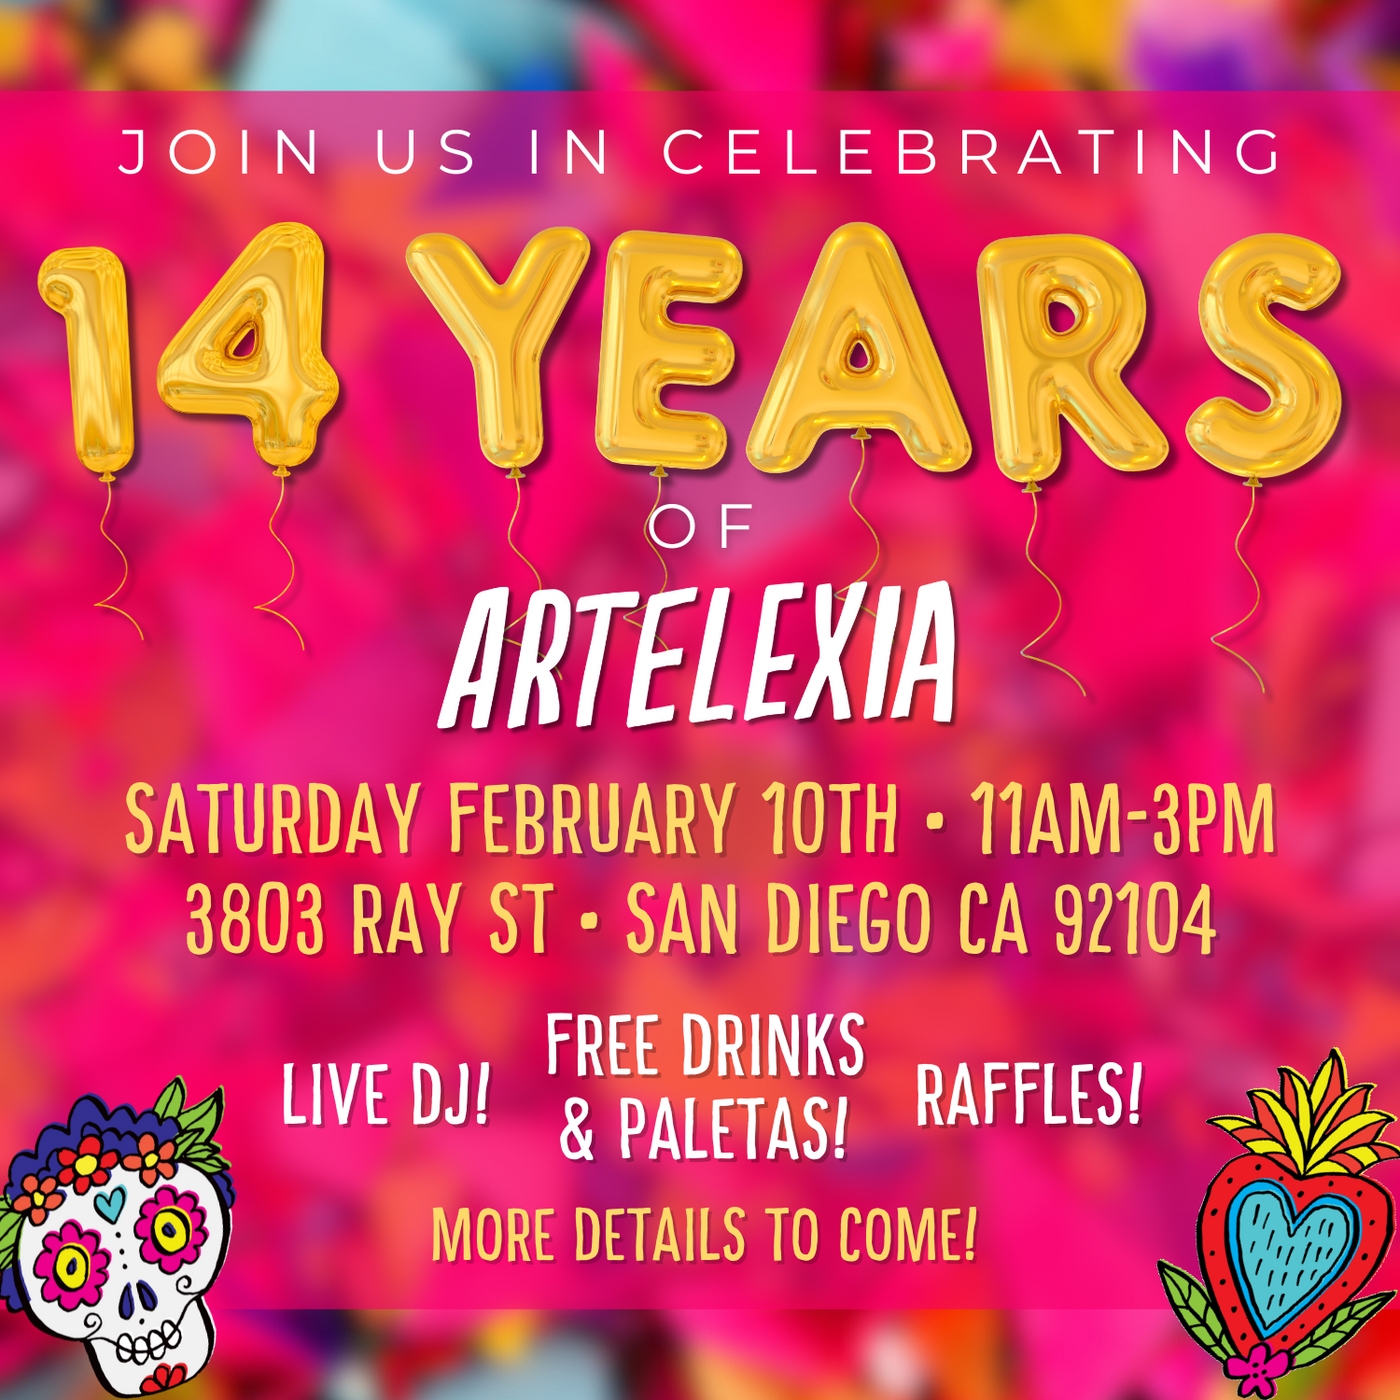 Join us in celebrating 14 years of Artelexia • Sat 2/10/24 from 11am-3pm • Live DJ! Free drinks & paletas! Raffles! More details to come!